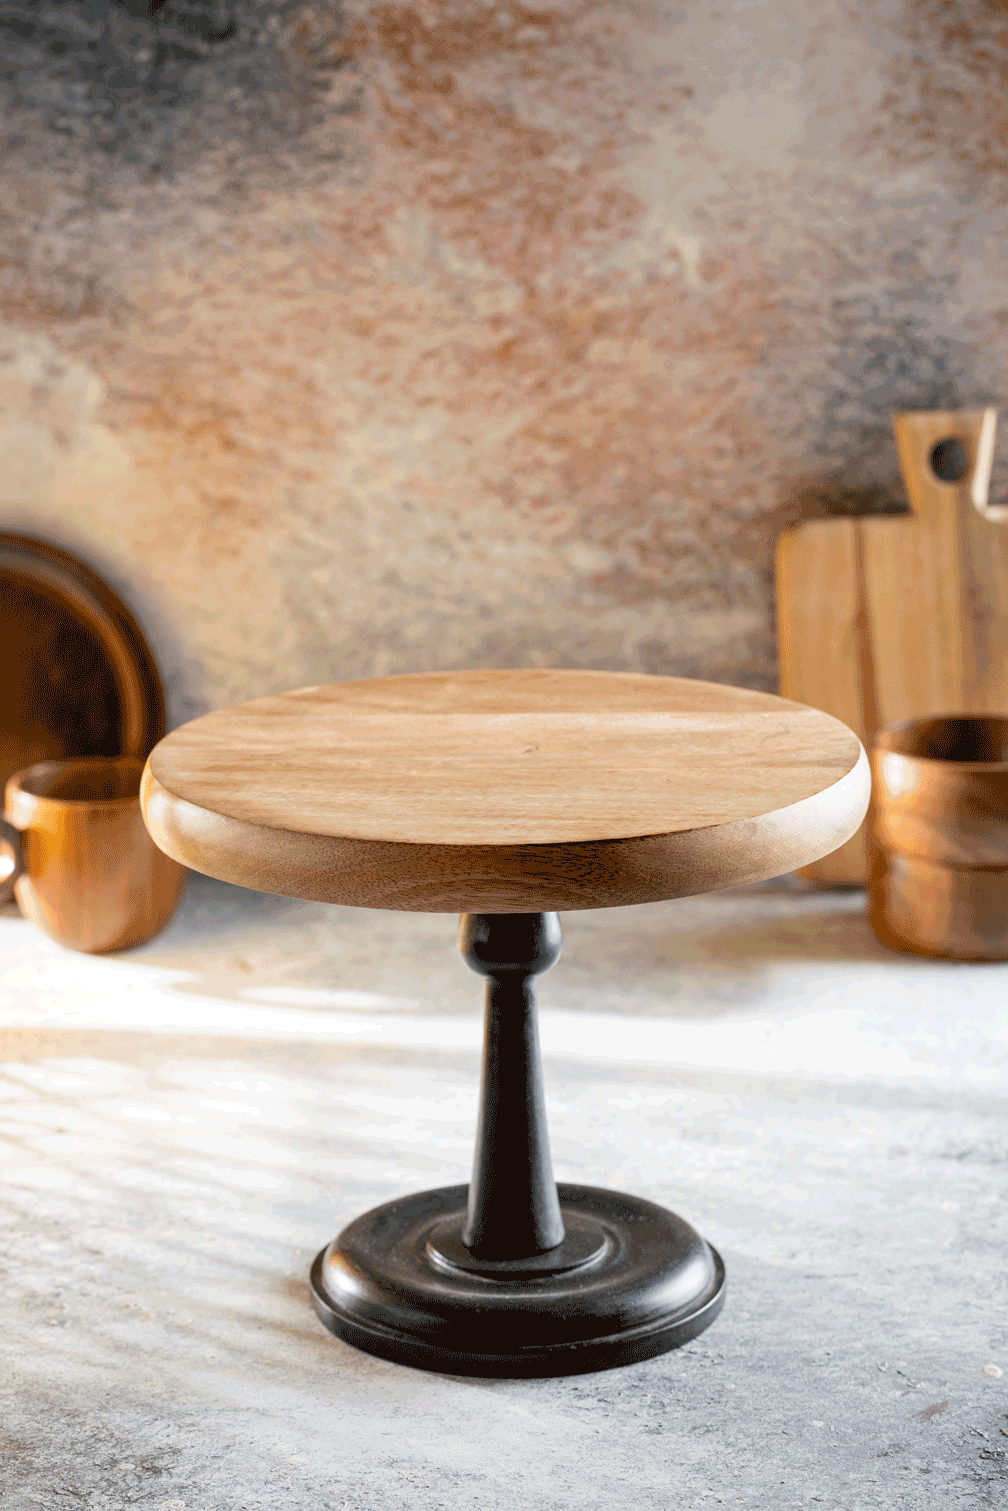 Poorna - Classic wooden cake stand, a product by Araana Homes